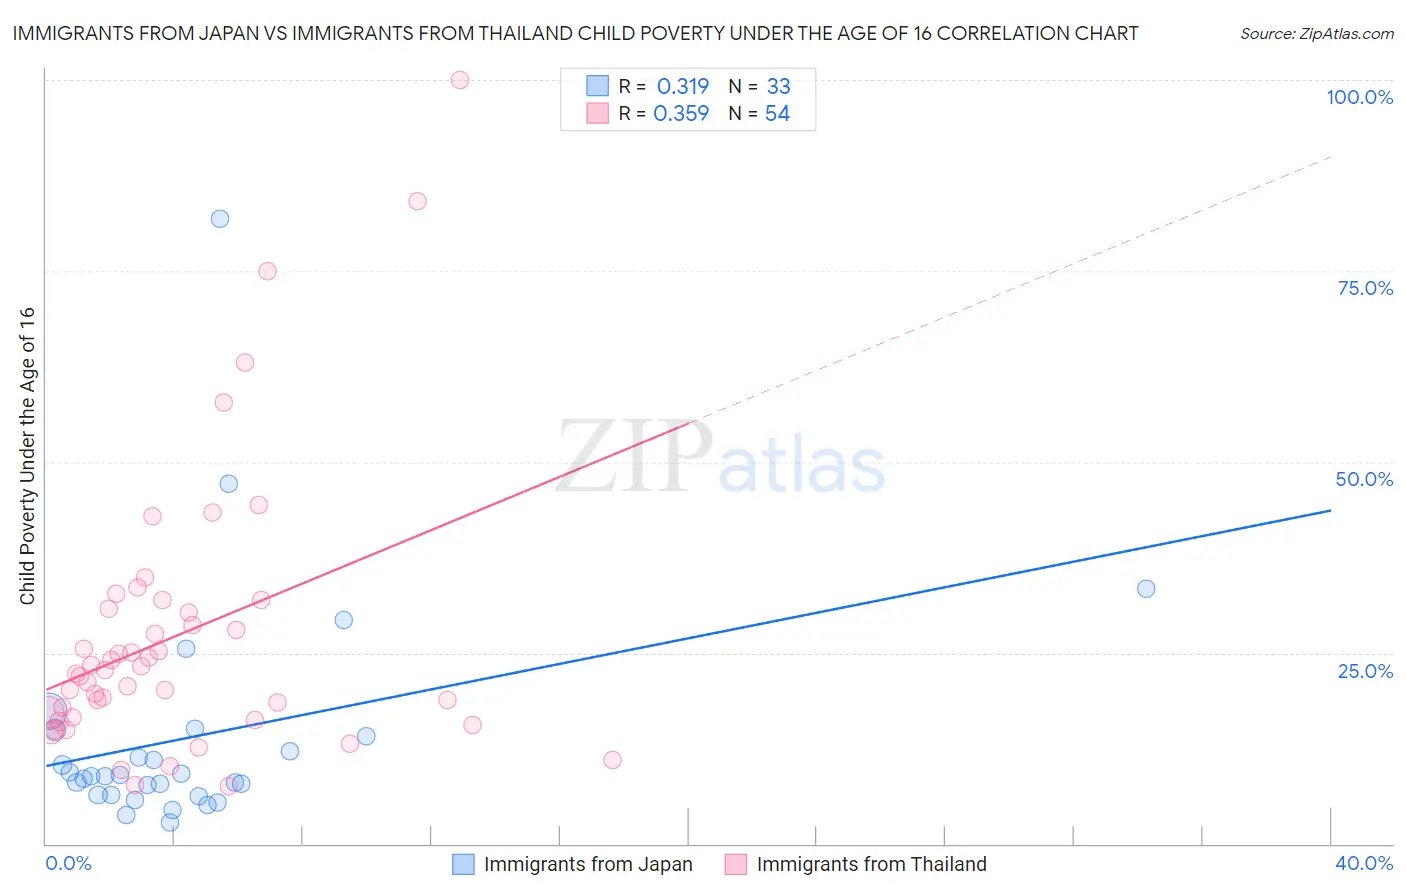 Immigrants from Japan vs Immigrants from Thailand Child Poverty Under the Age of 16